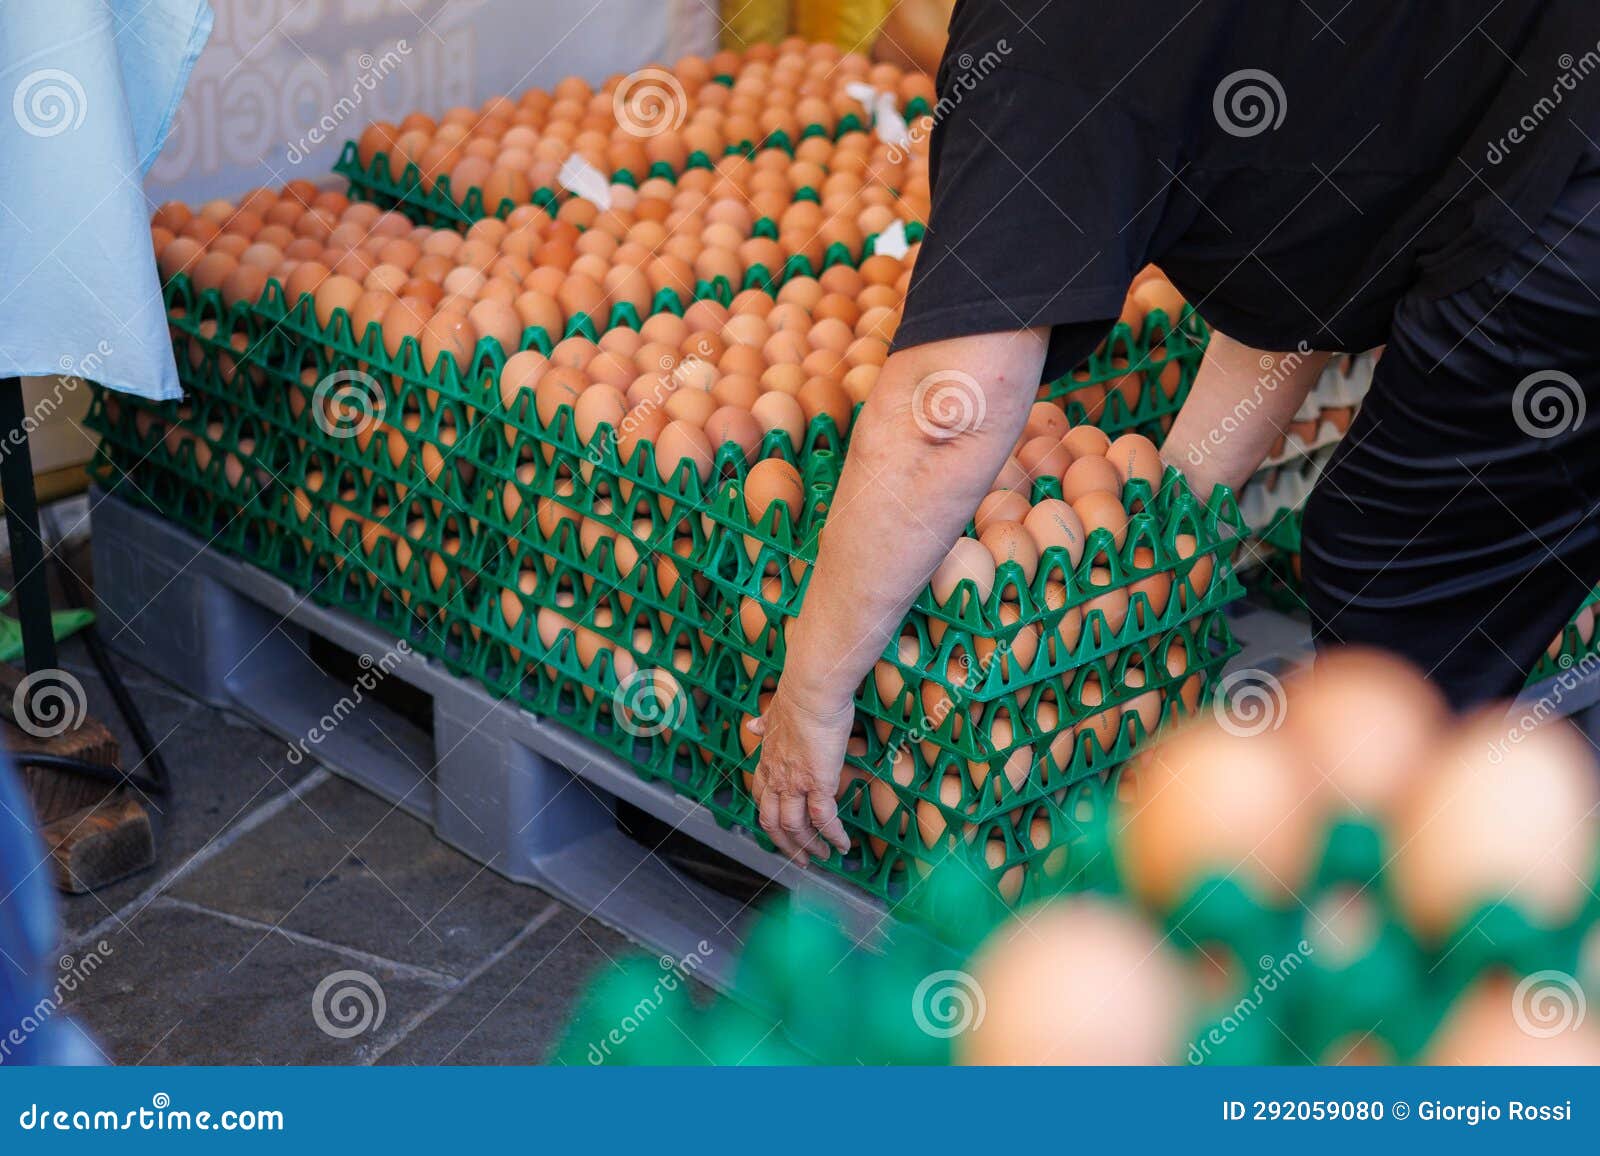 woman who proceeds to lift multiple egg packs